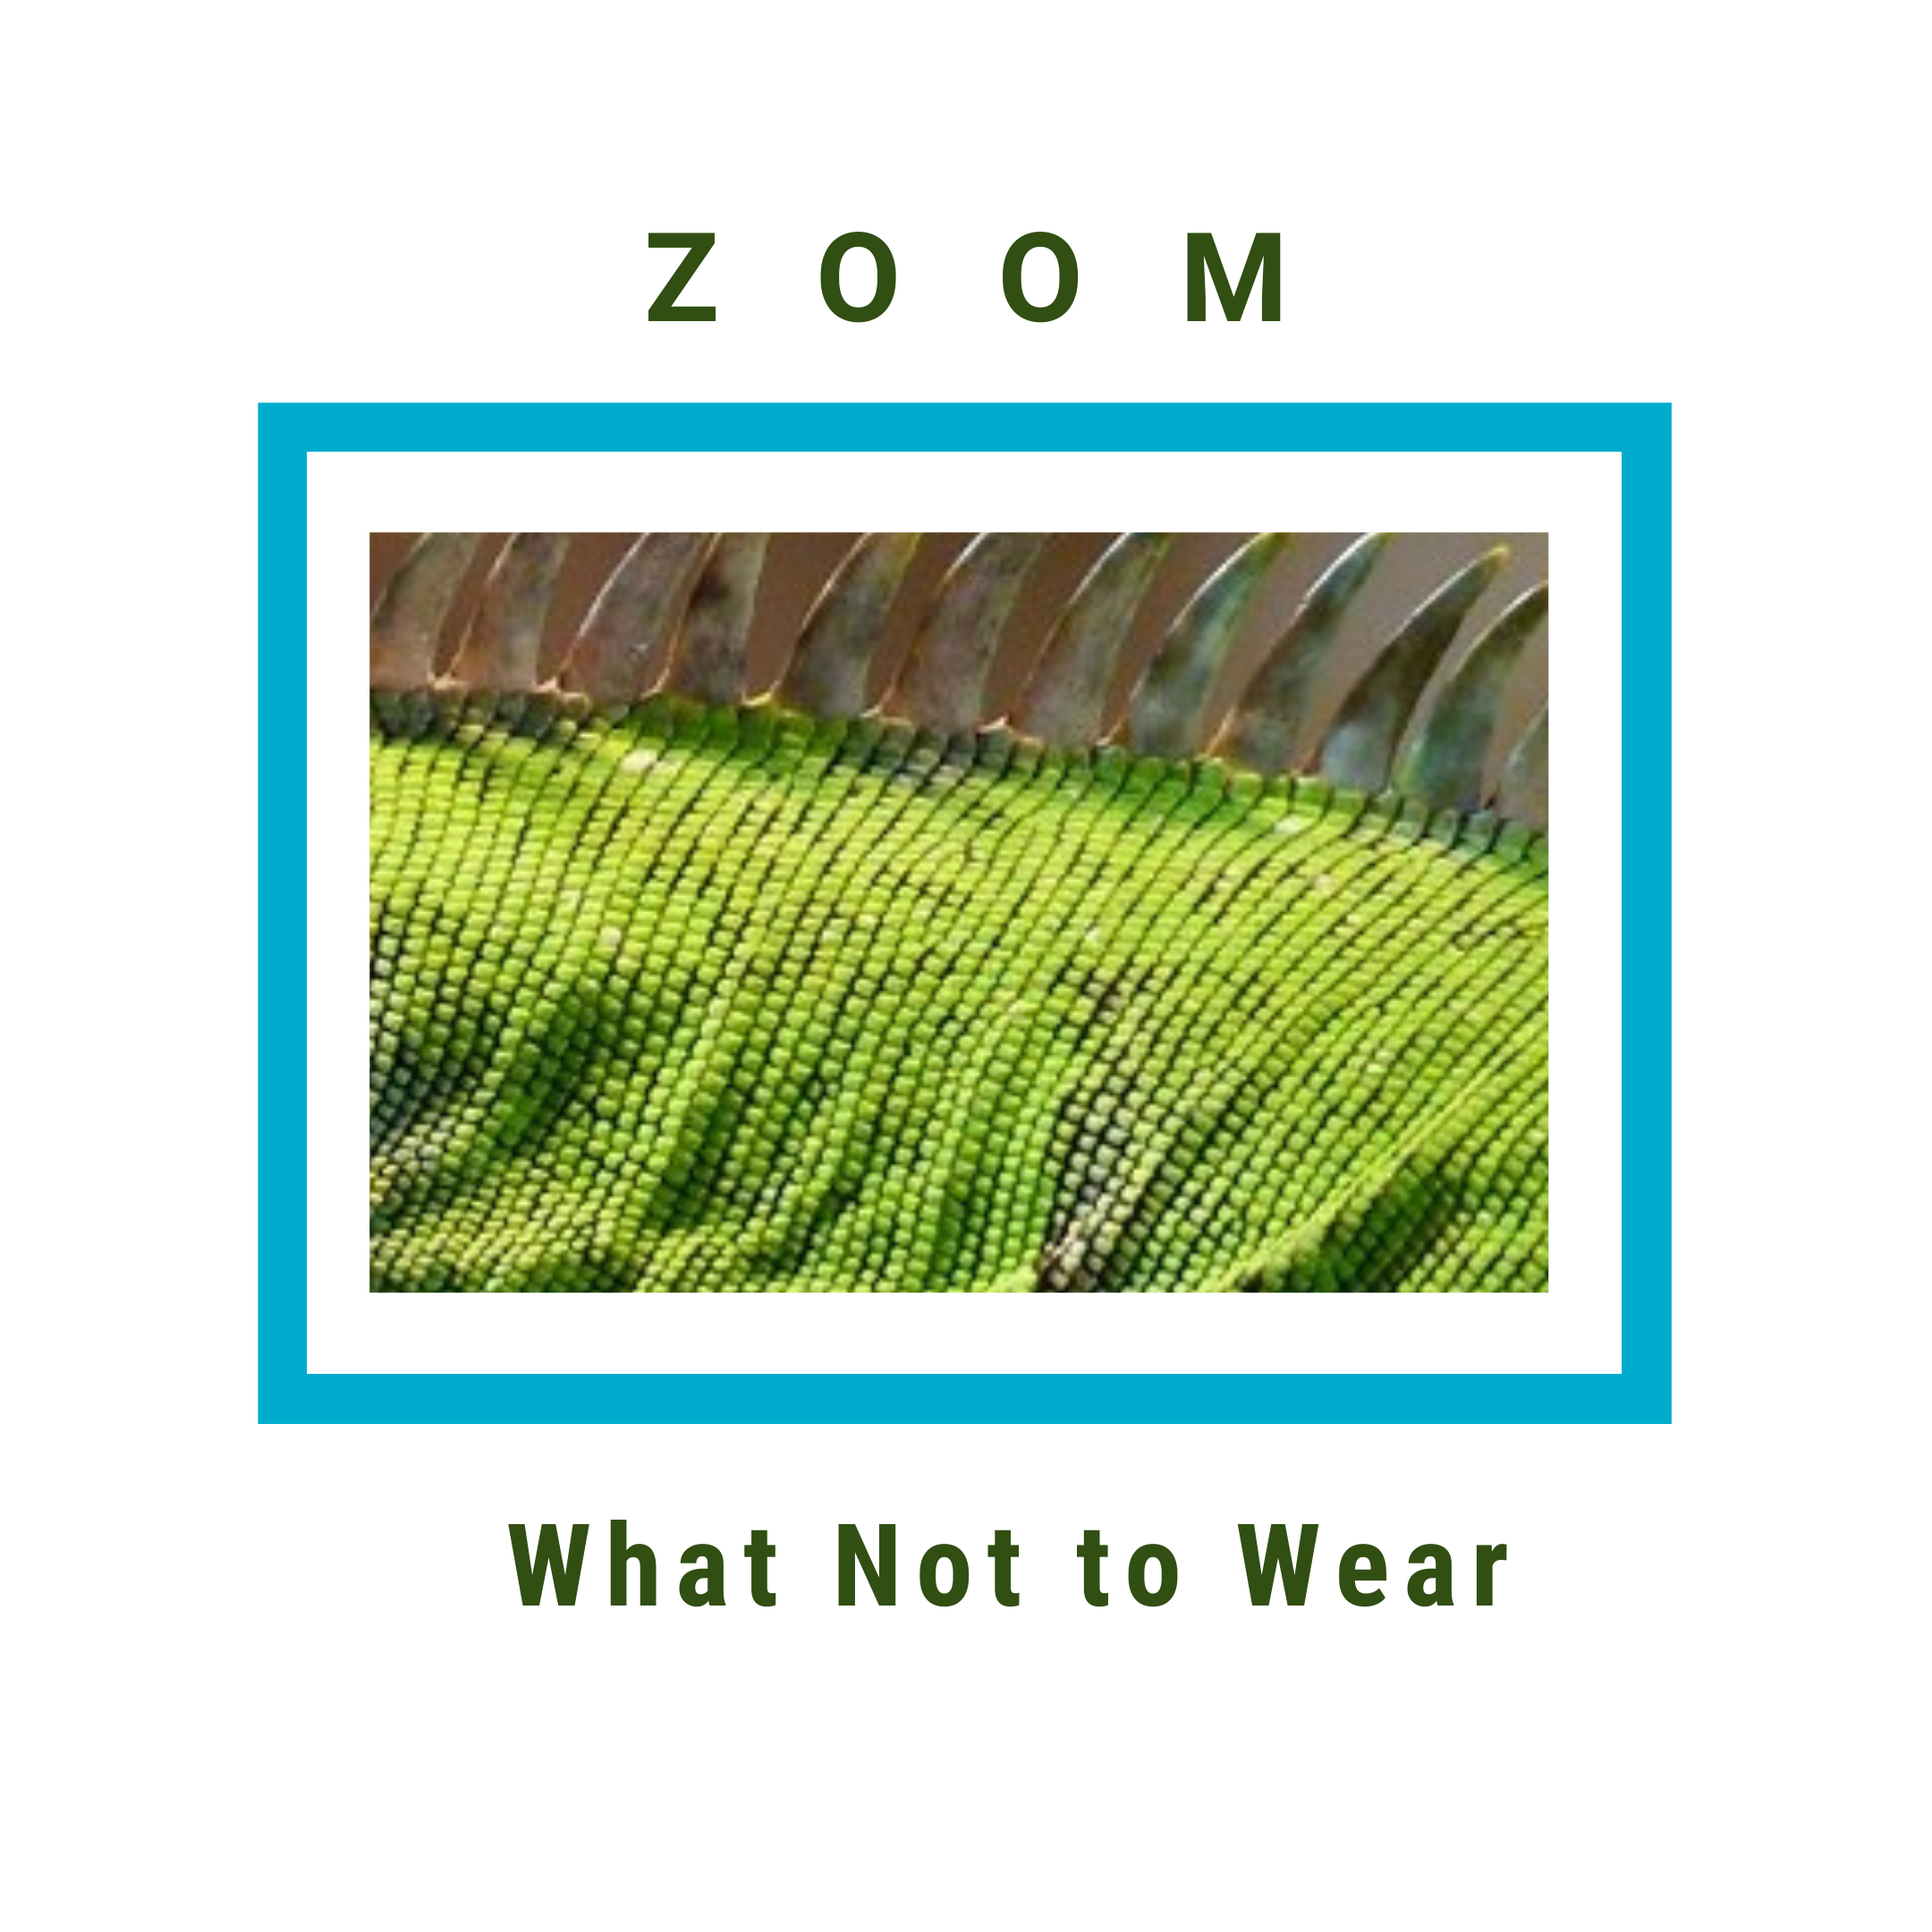 Green iguana photo with text above and below stating Zoom what not to wear